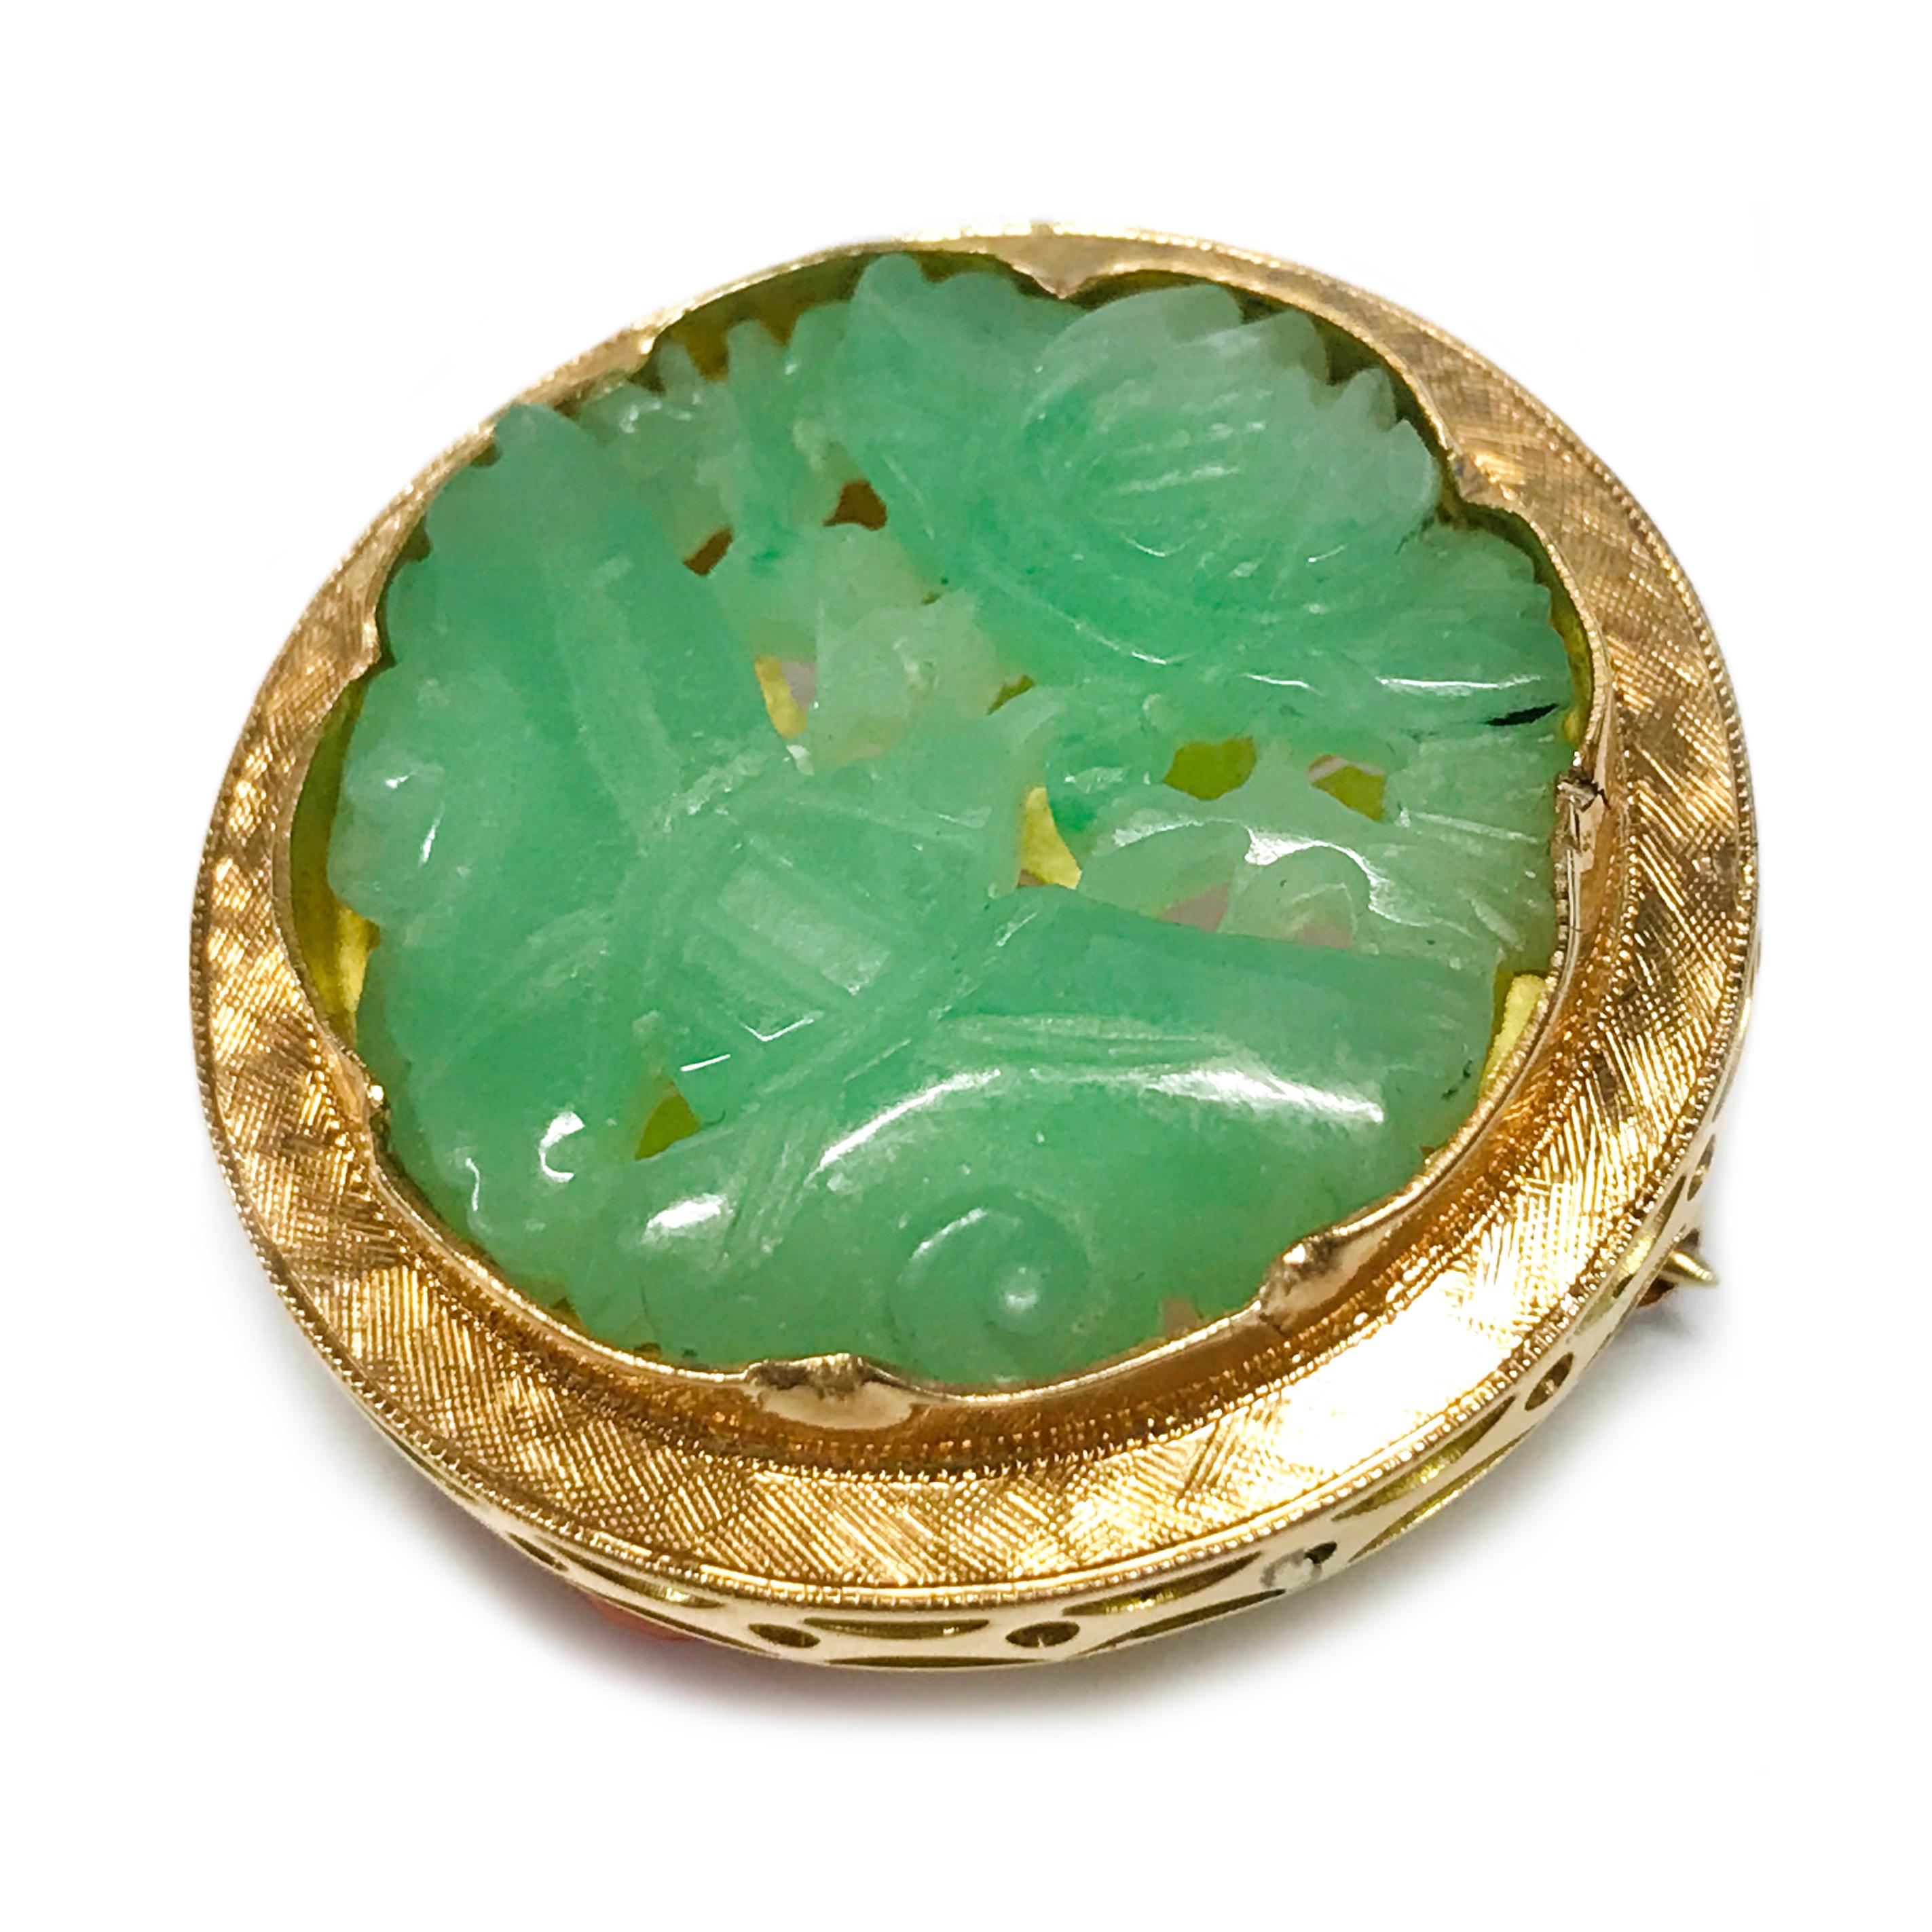 14 Karat Jade Coral Brooch. This brooch features a carved green Jade bezel-set in a decorative gold setting. The carved Jade is an image of a butterfly with its wings outspread and a lotus flower above. There is a Florentine finish along the bezel